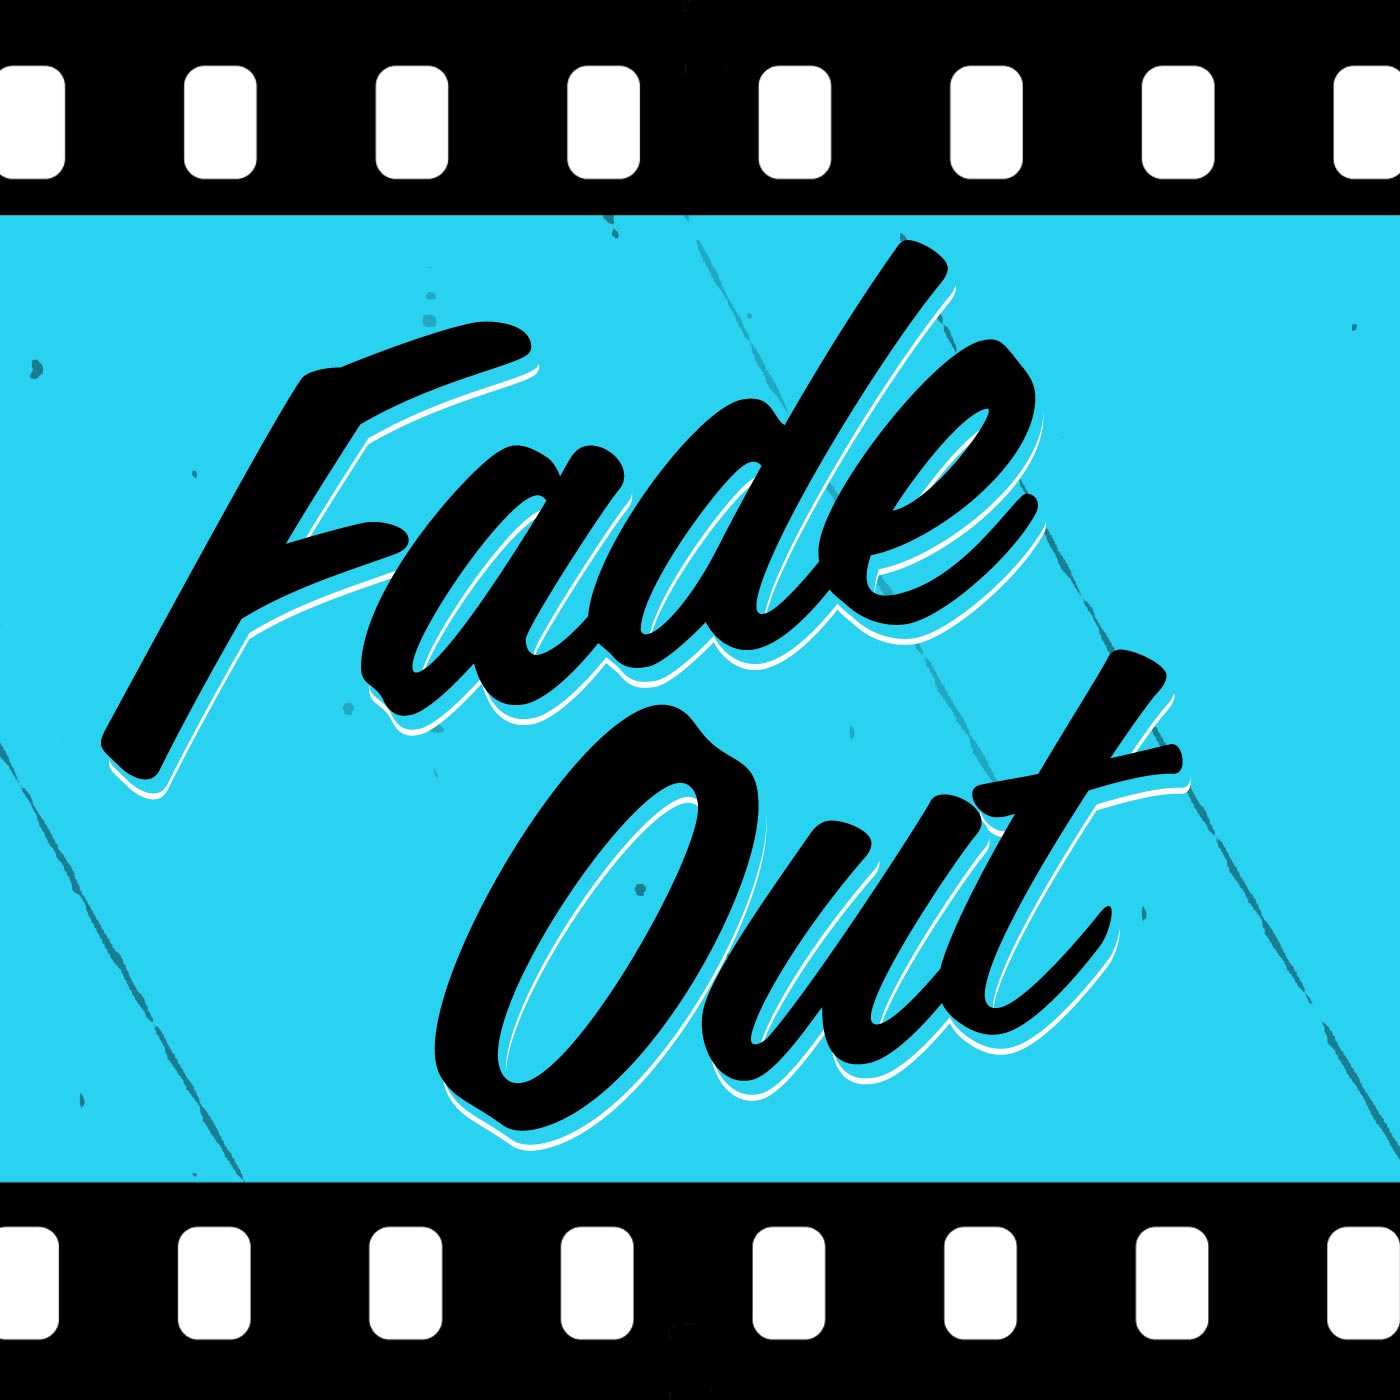 Fade Out - Elaine May